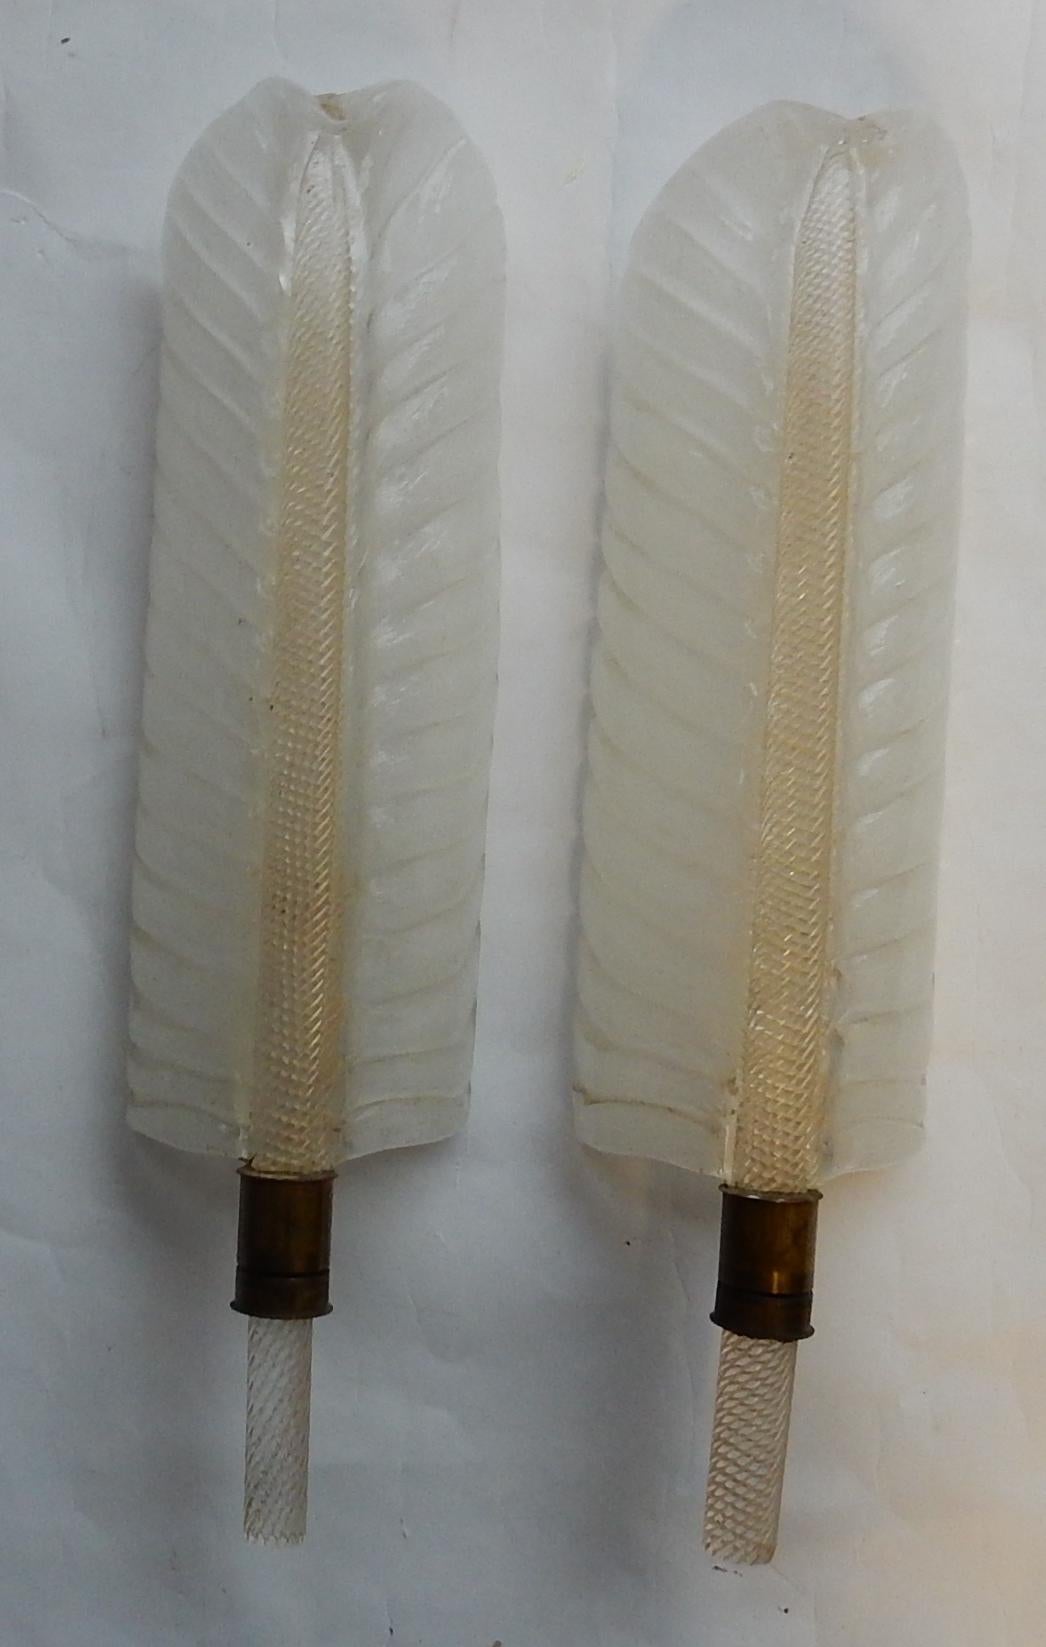 Pair of sconces in crystal or Murano glass circa 1950-1970, good condition
This model is screwed
Measures: Width 15 cm
Height 55 cm
Depth 11 cm.